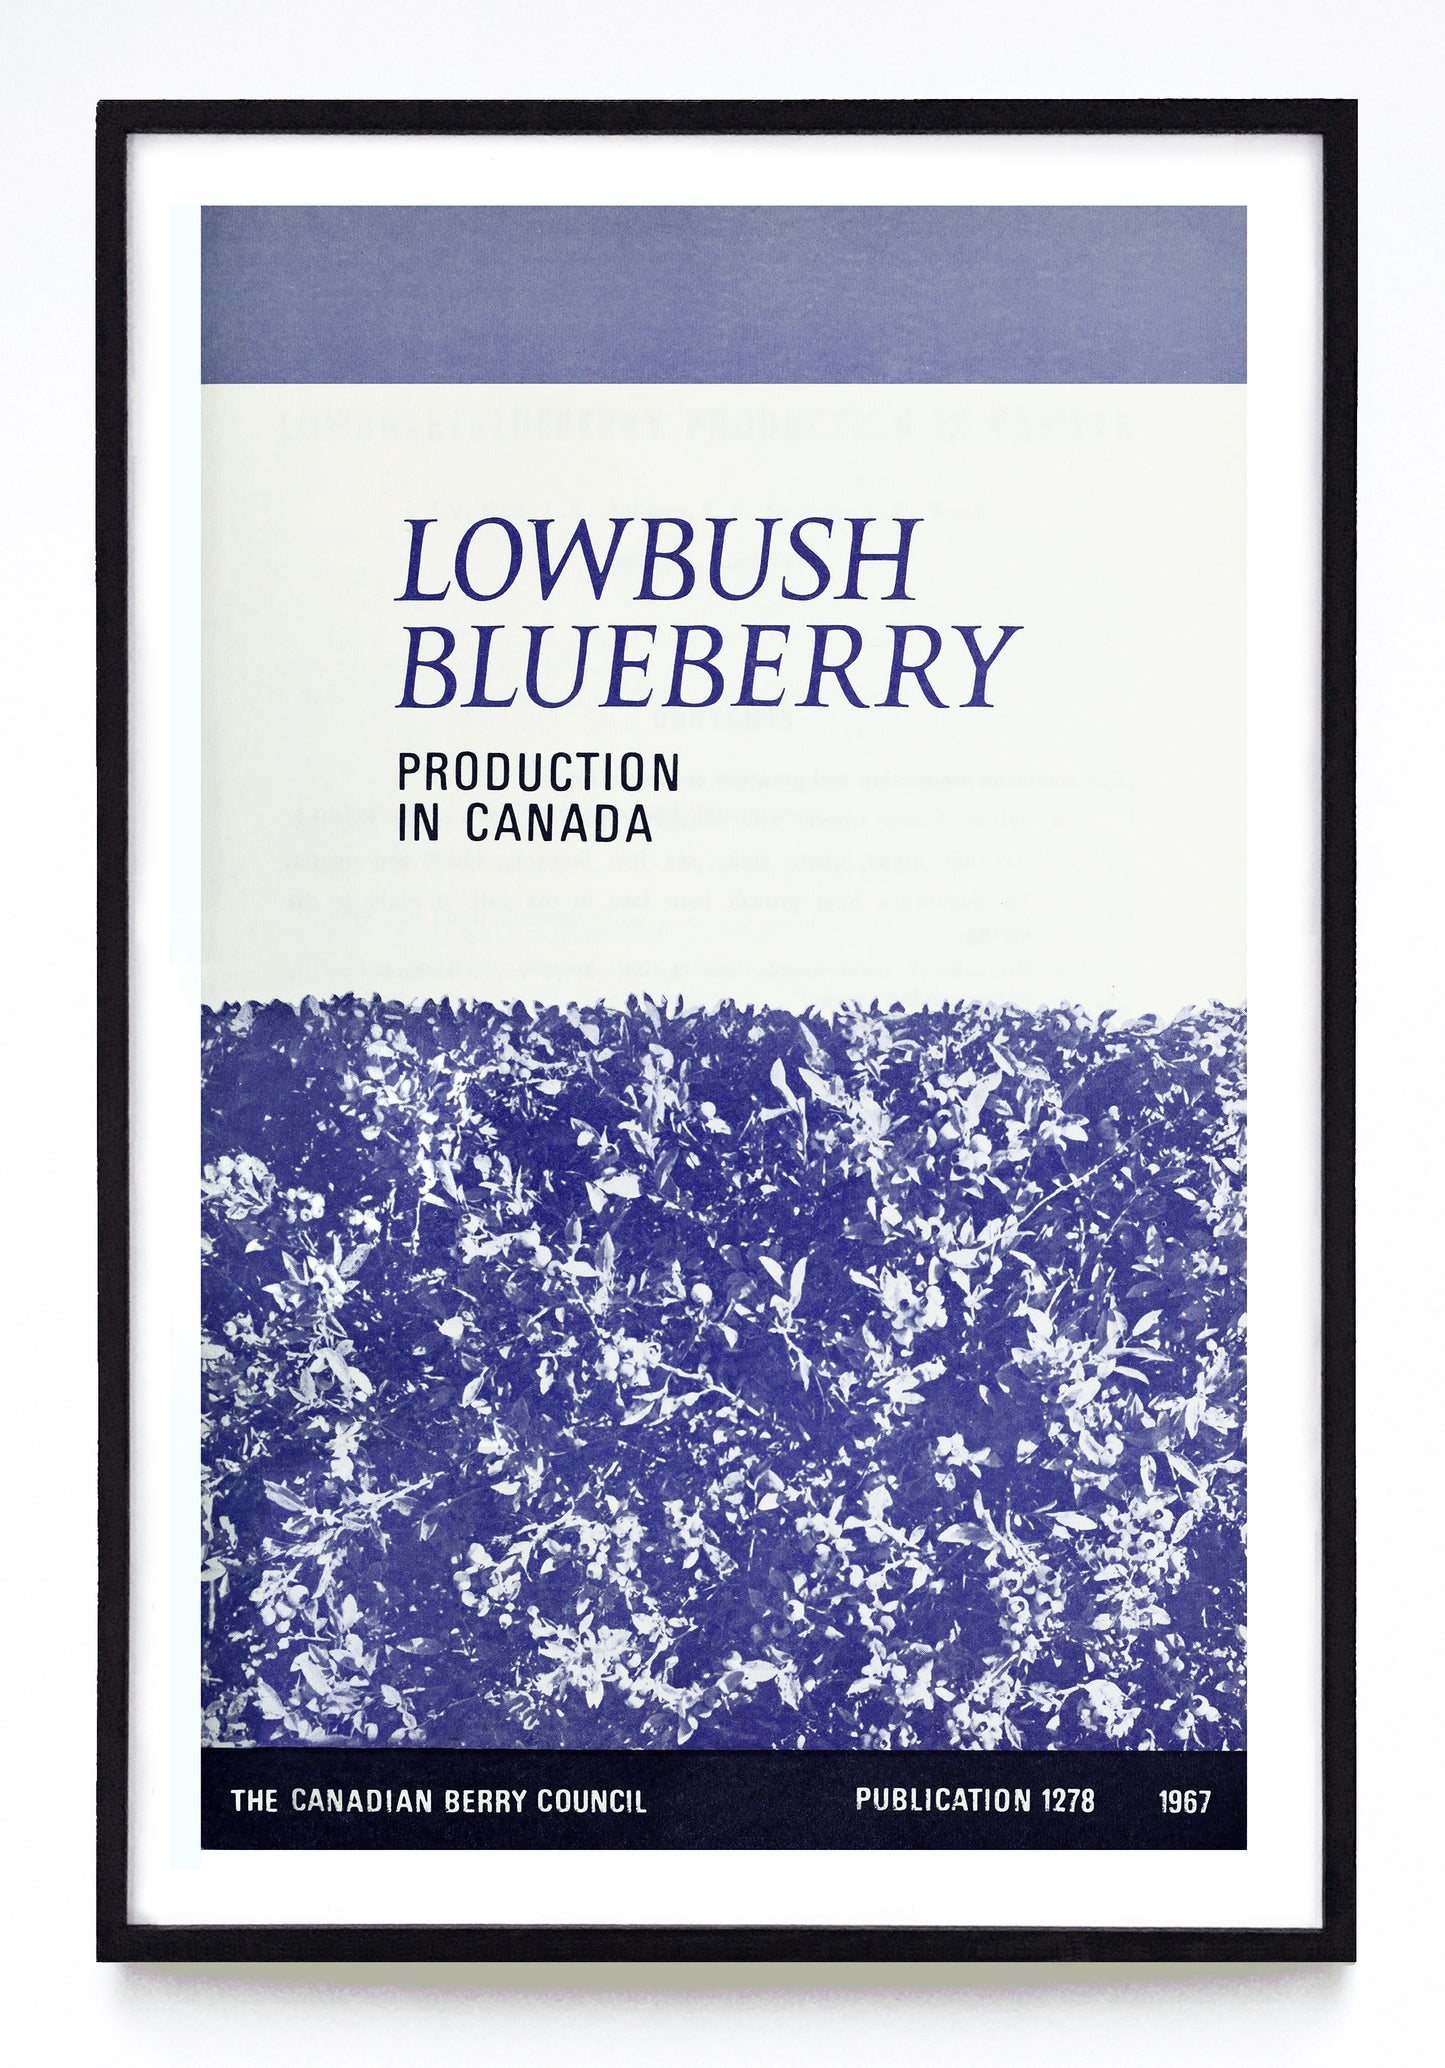 "Lowbush Blueberry Production in Canada" print (1967)